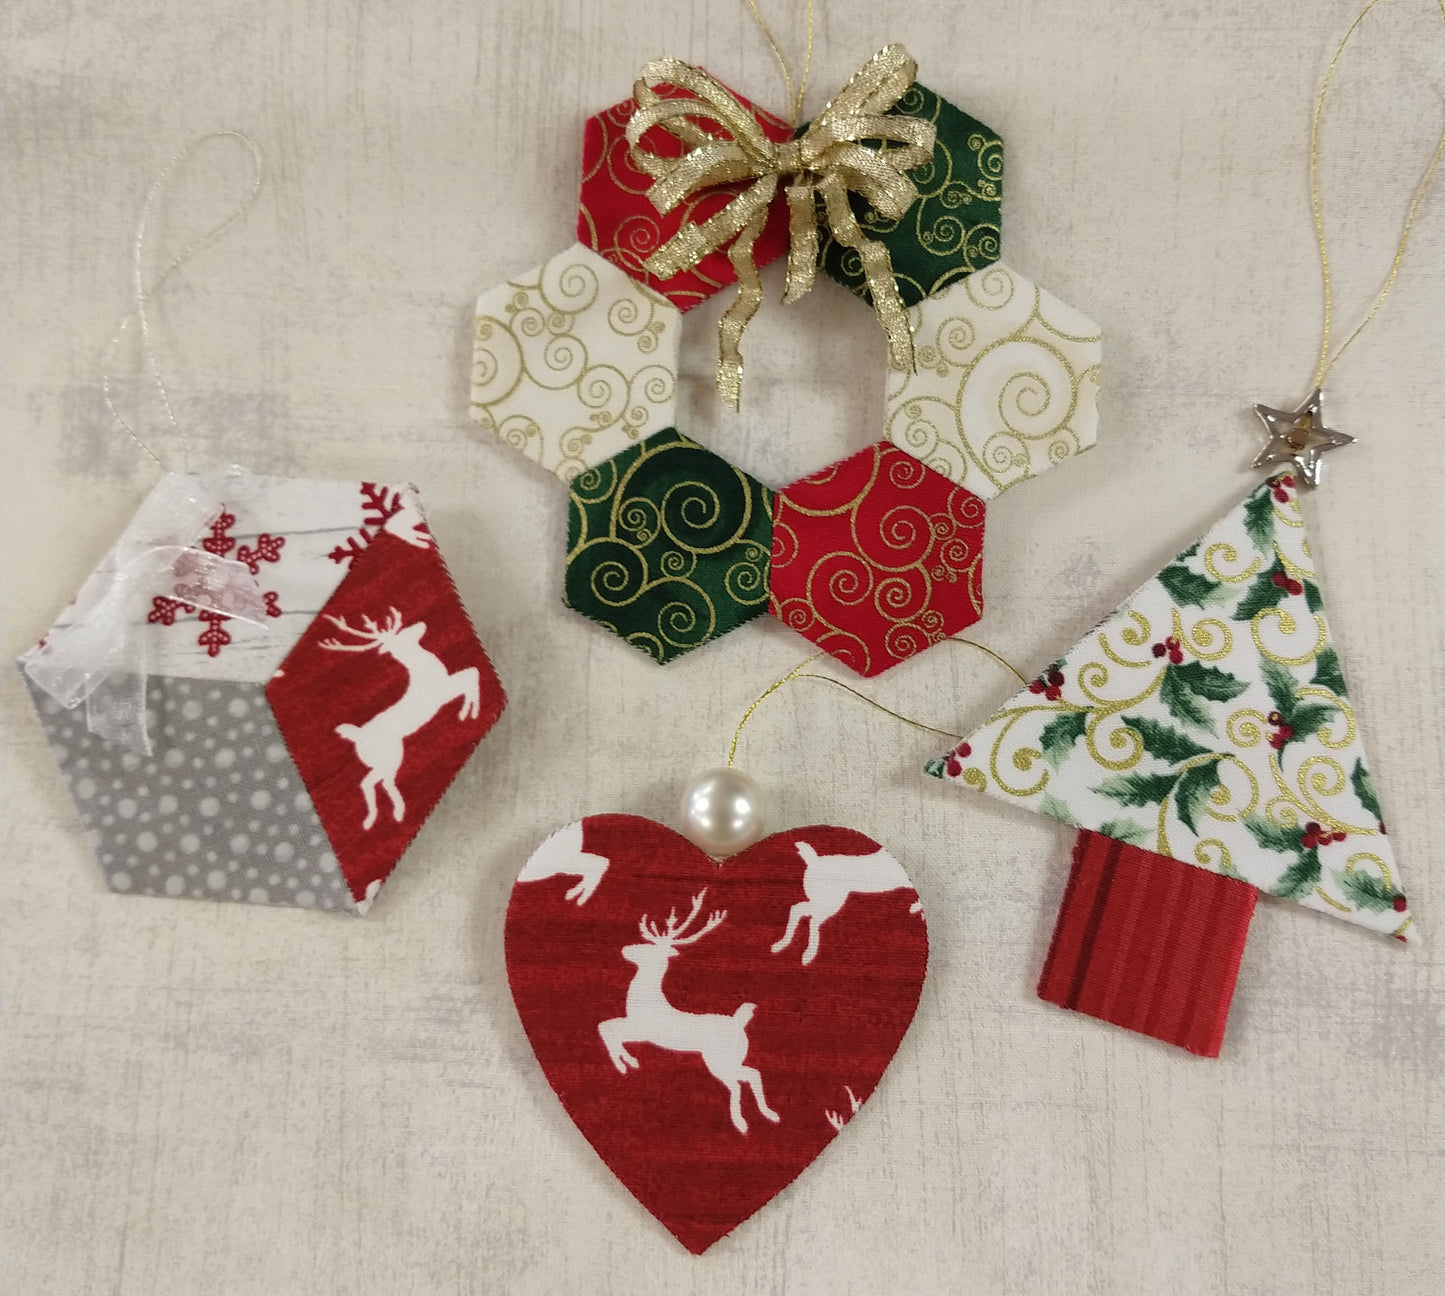 More Christmas Ornaments by Paper Pieces